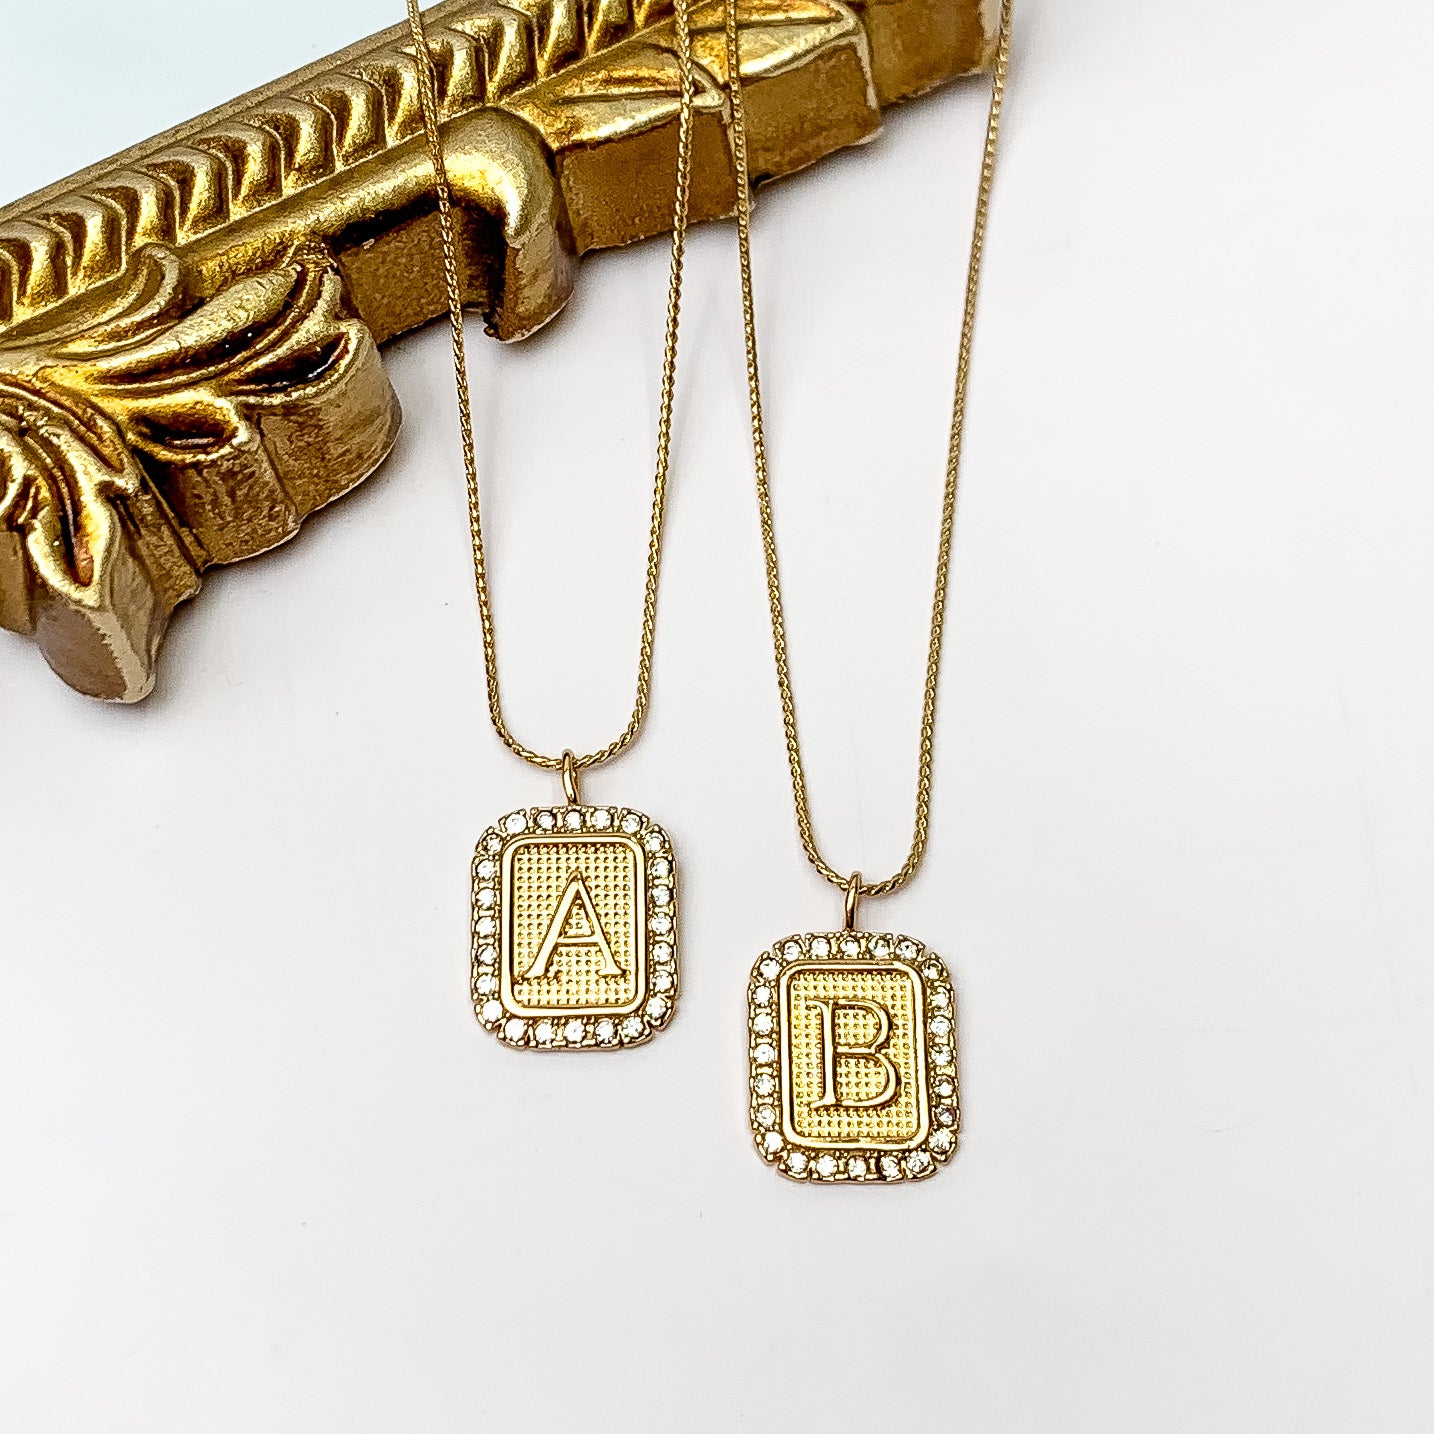 Gold Tone Chain Necklace with Rectangle Initial Pendant Outlined in Clear Crystals. Pictured on a white background with the top of the necklace on a gold frame.